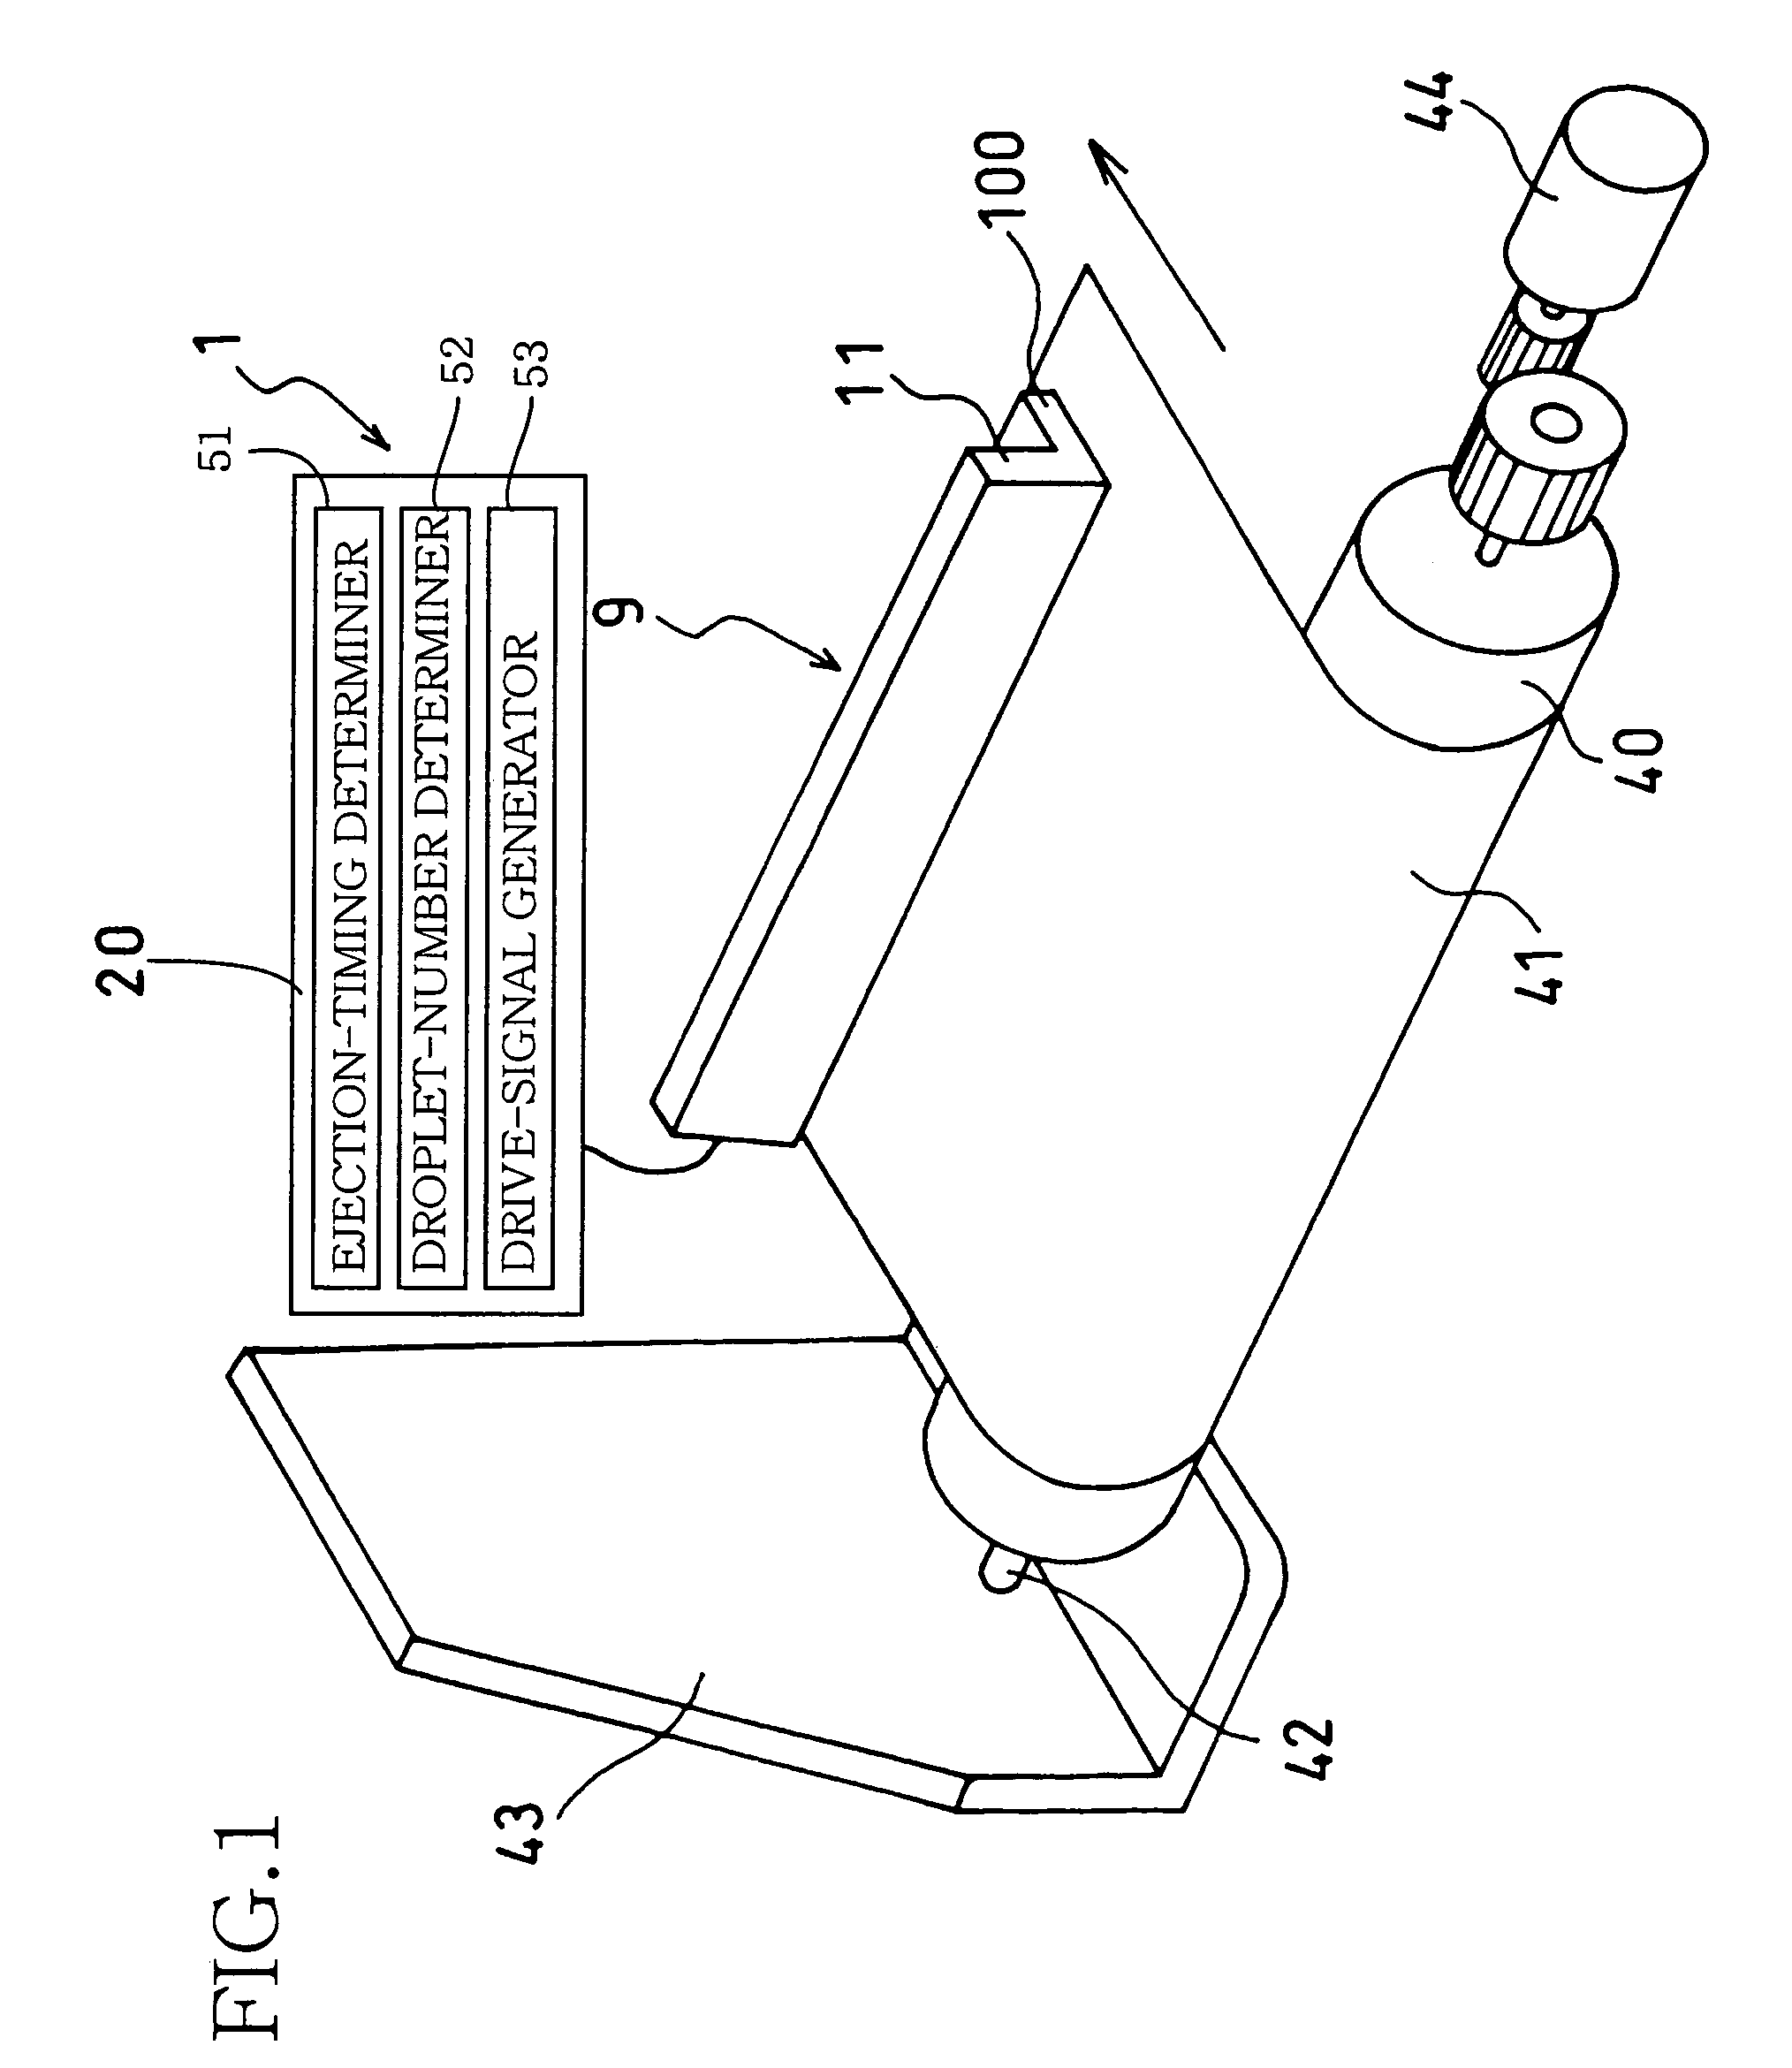 Droplet ejection device